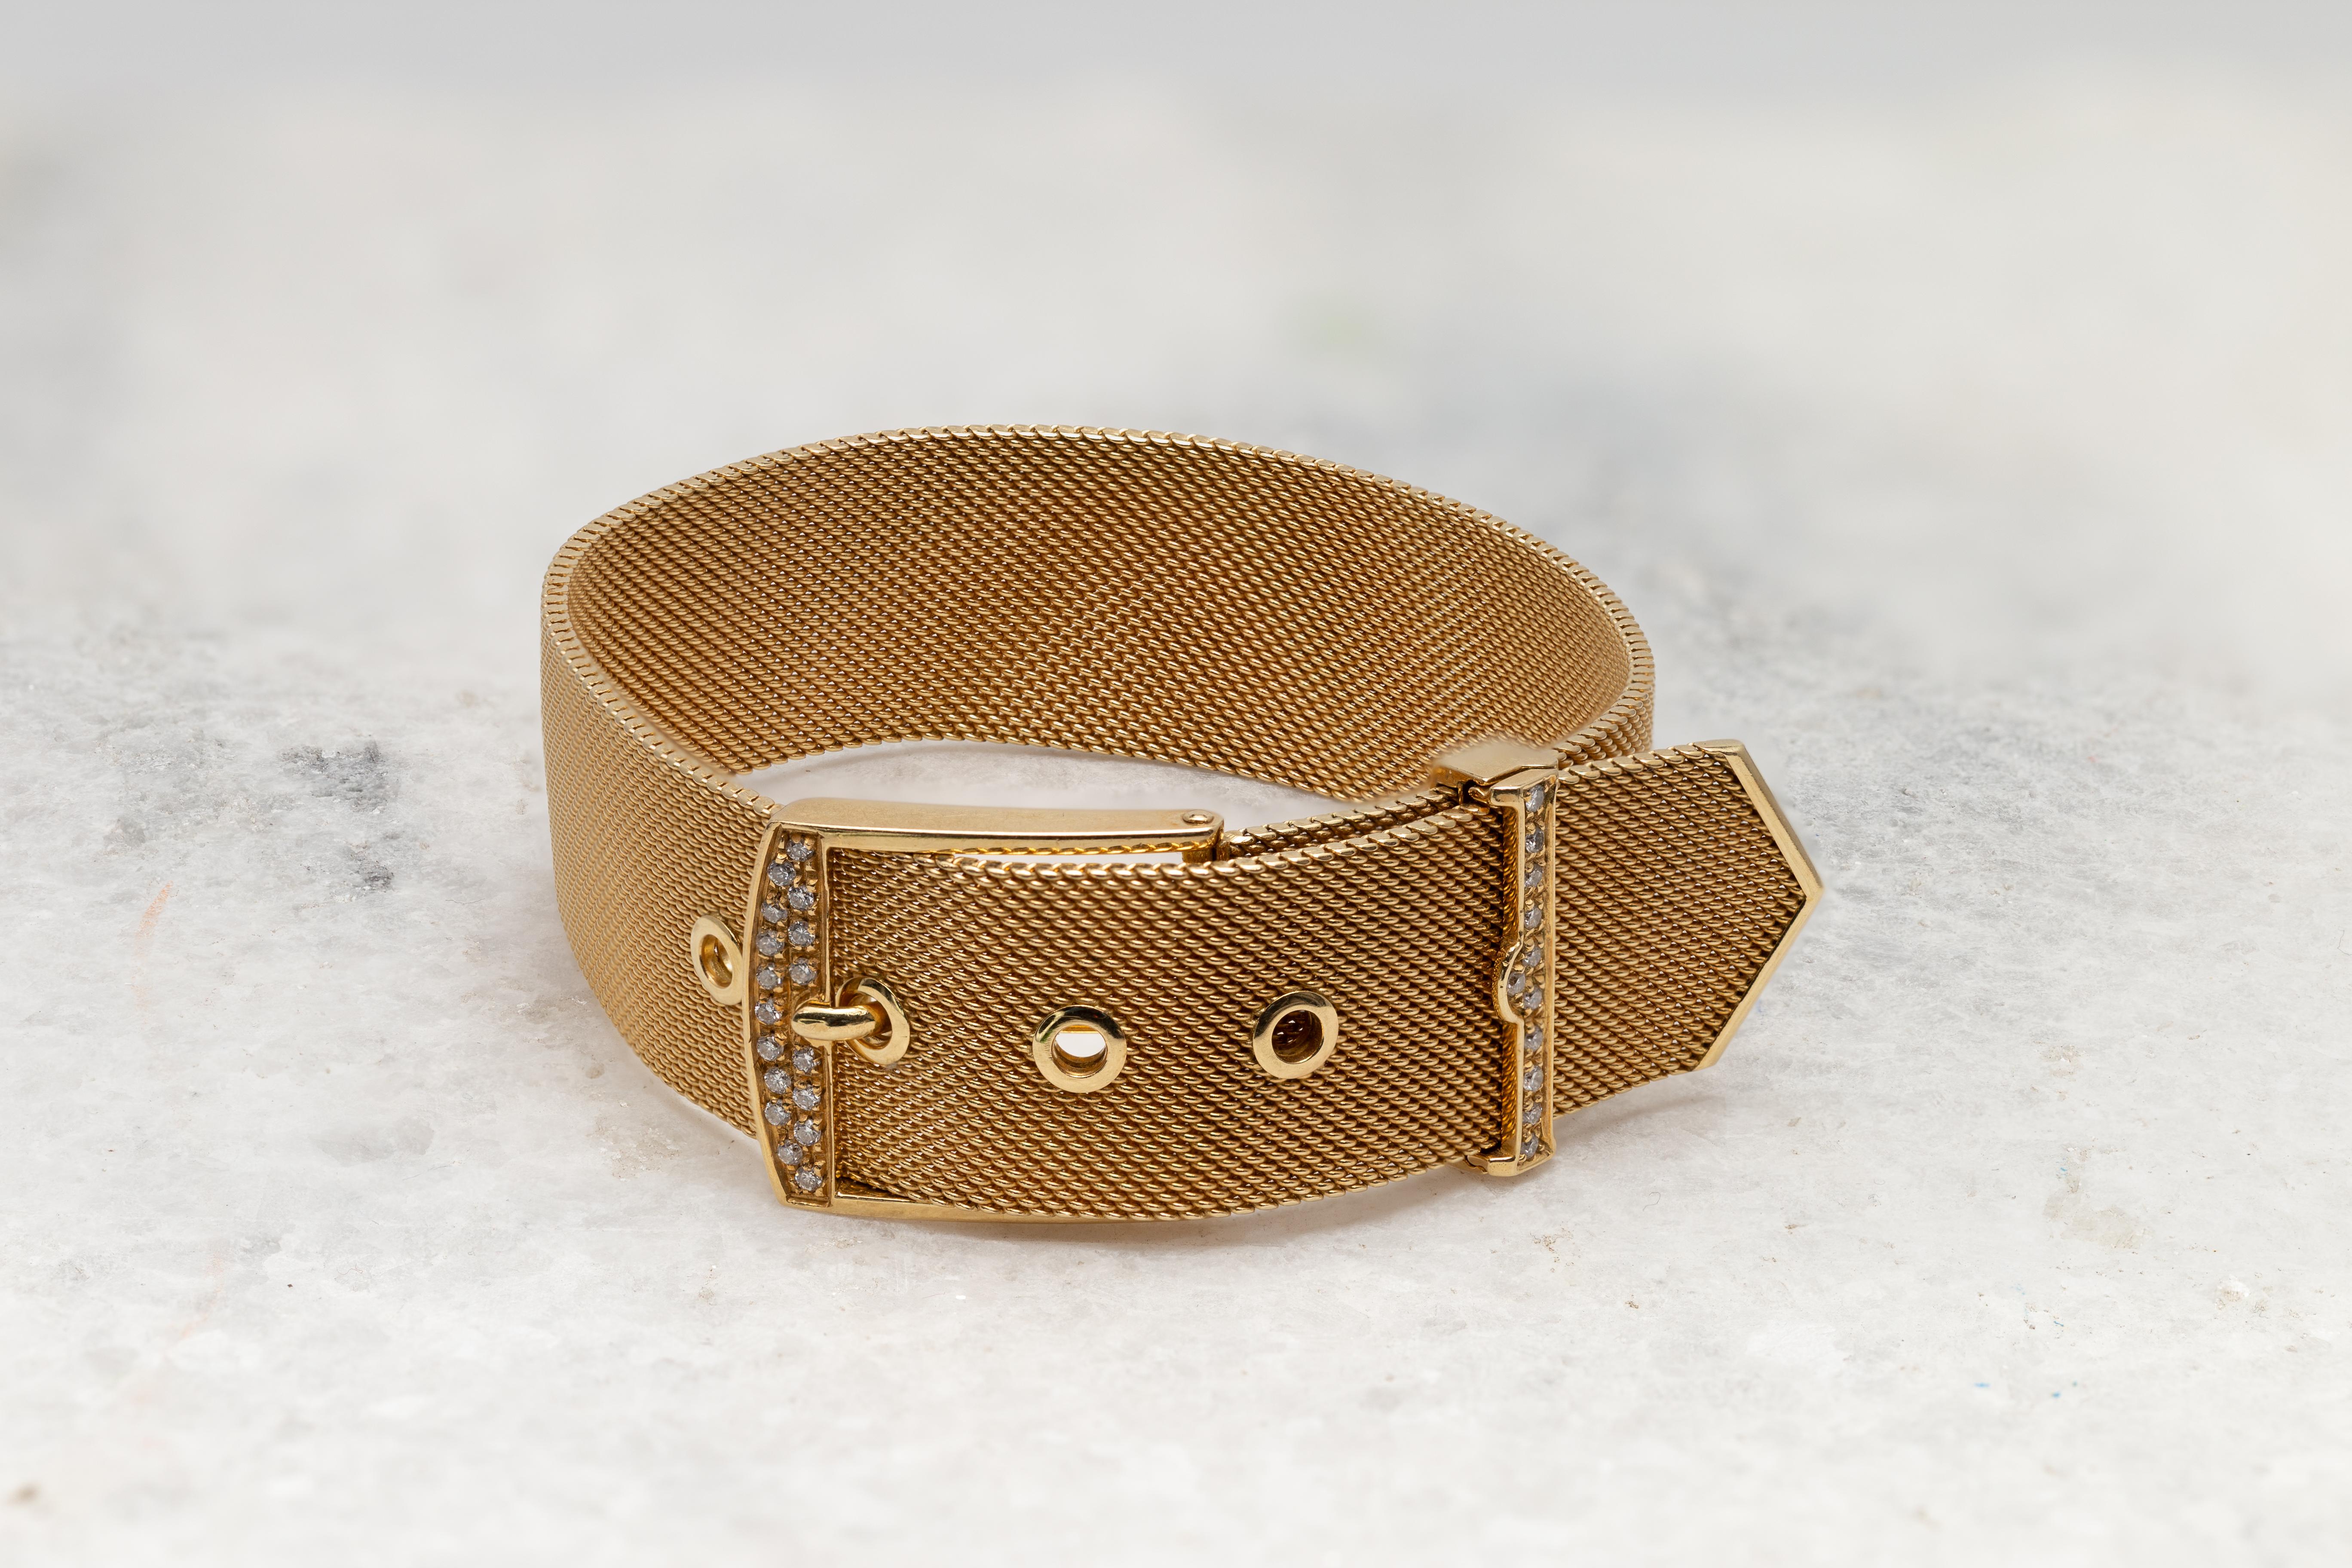 A Modern 18 karat yellow Gold buckle bracelet circa 1960 with round Diamonds. Presenting an 18 karat yellow Gold mesh style structure, this trendy buckle bracelet is delicately accented with 0.40 carat Diamonds. Adjustable to your wrist and weighing